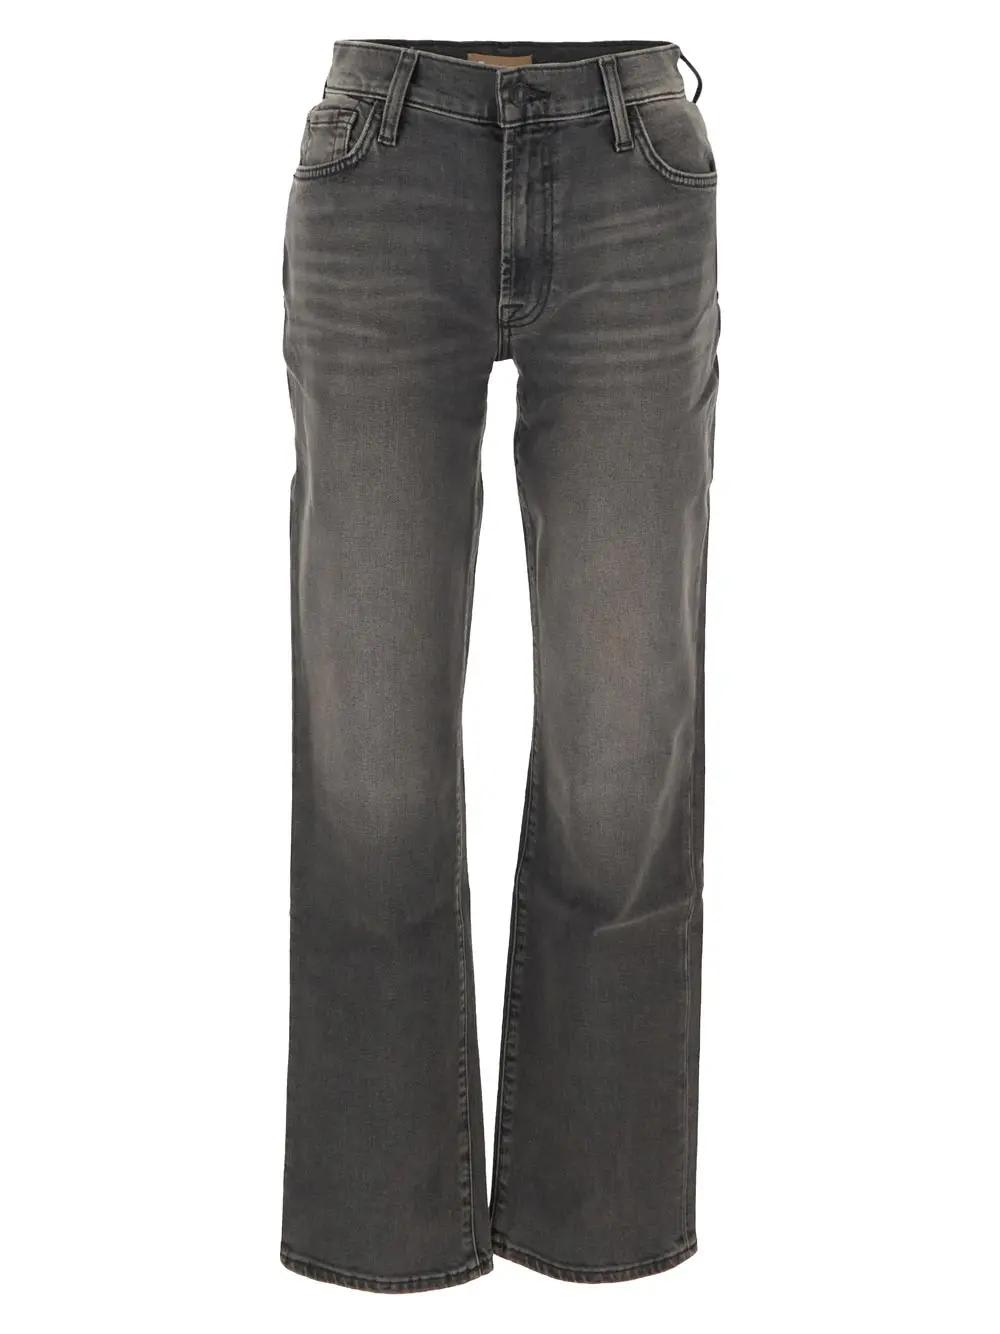 7 FOR ALL MANKIND ELLIE STRAIGHT JEANS